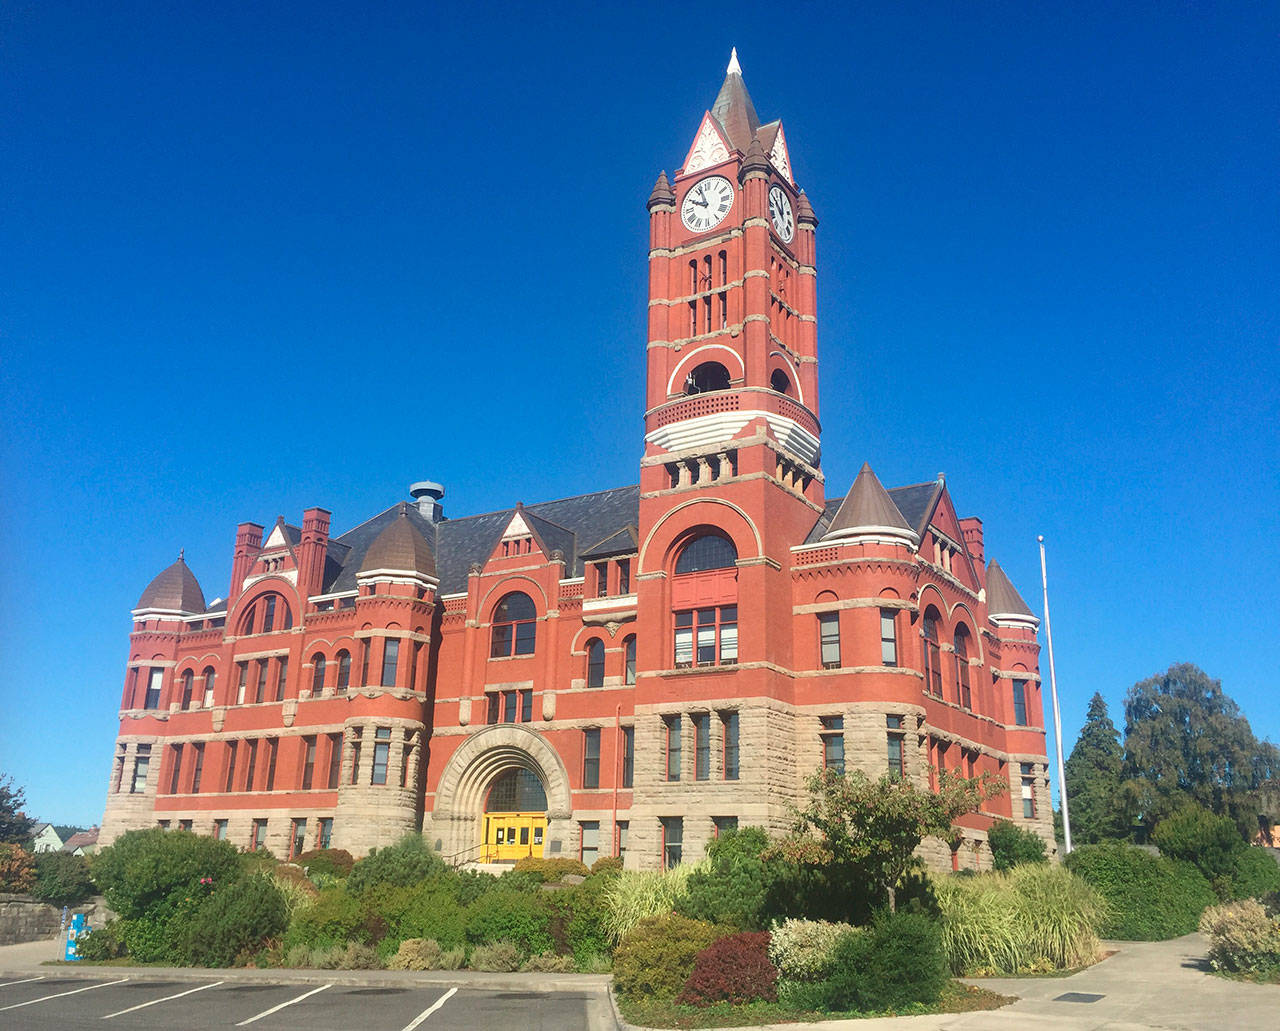 The Jefferson County Courthouse will get new security measures including metal detectors and security cameras. (Cydney McFarland/Peninsula Daily News)